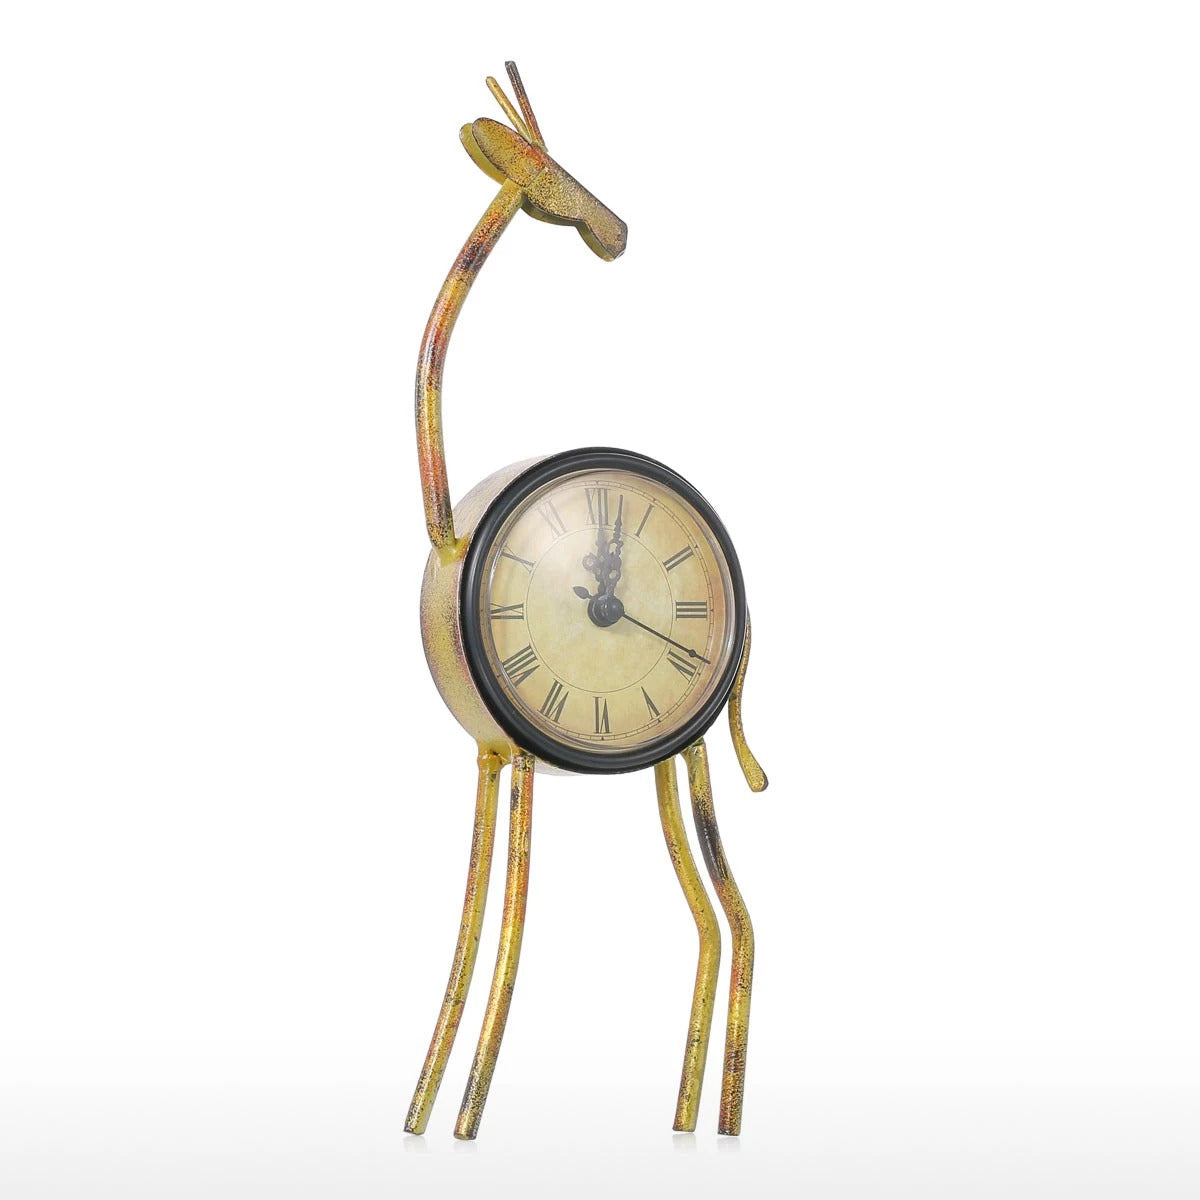 Small & Decorative Table Clock by Cat, Deer, Flamingo, Chicken, Pig